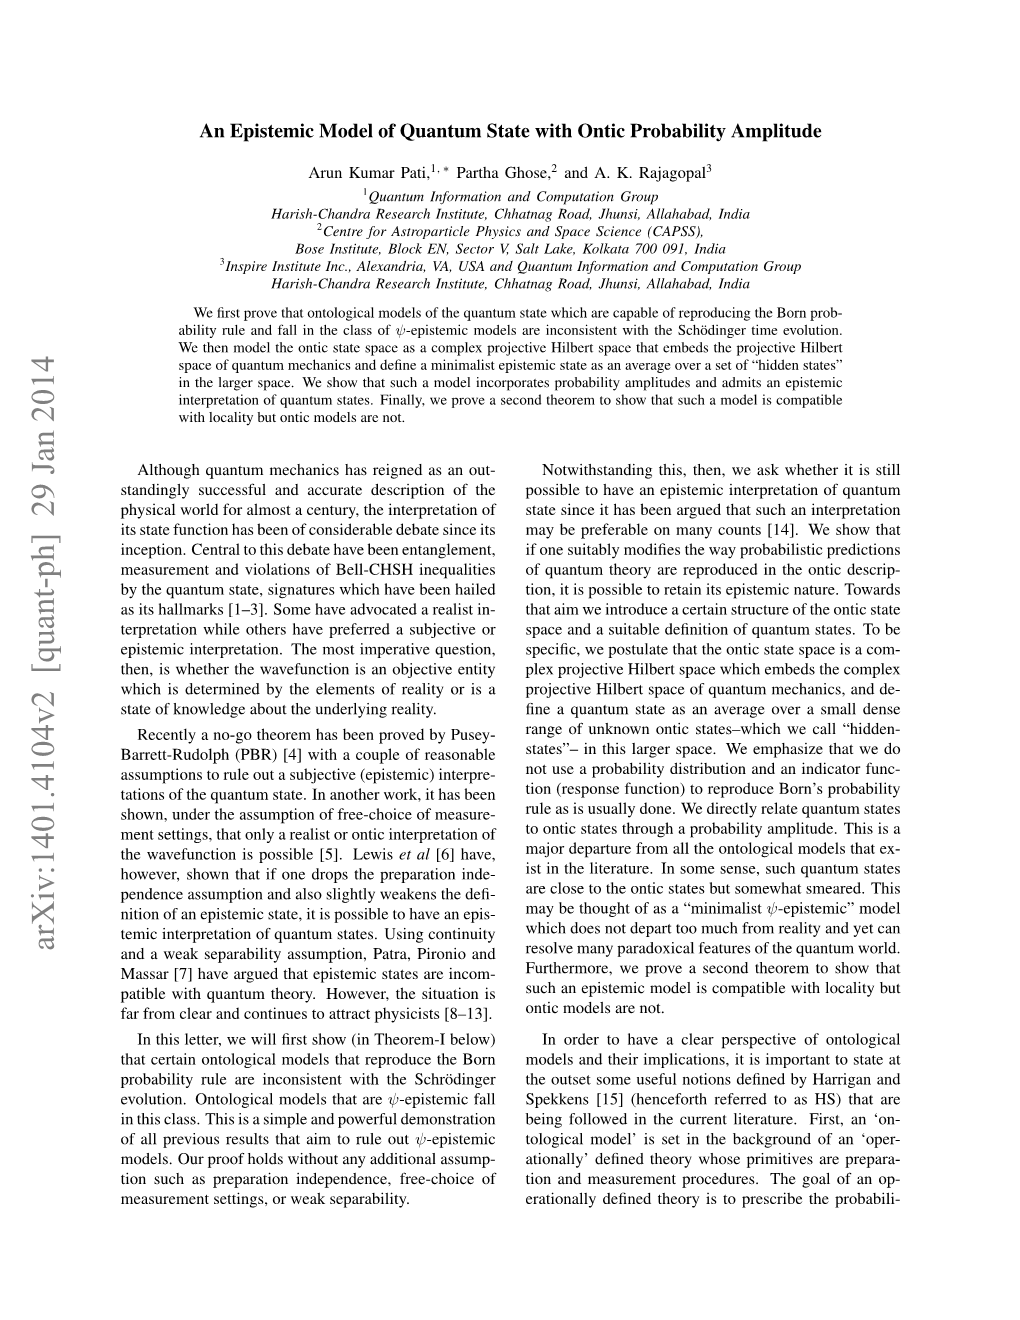 An Epistemic Model of Quantum State with Ontic Probability Amplitude